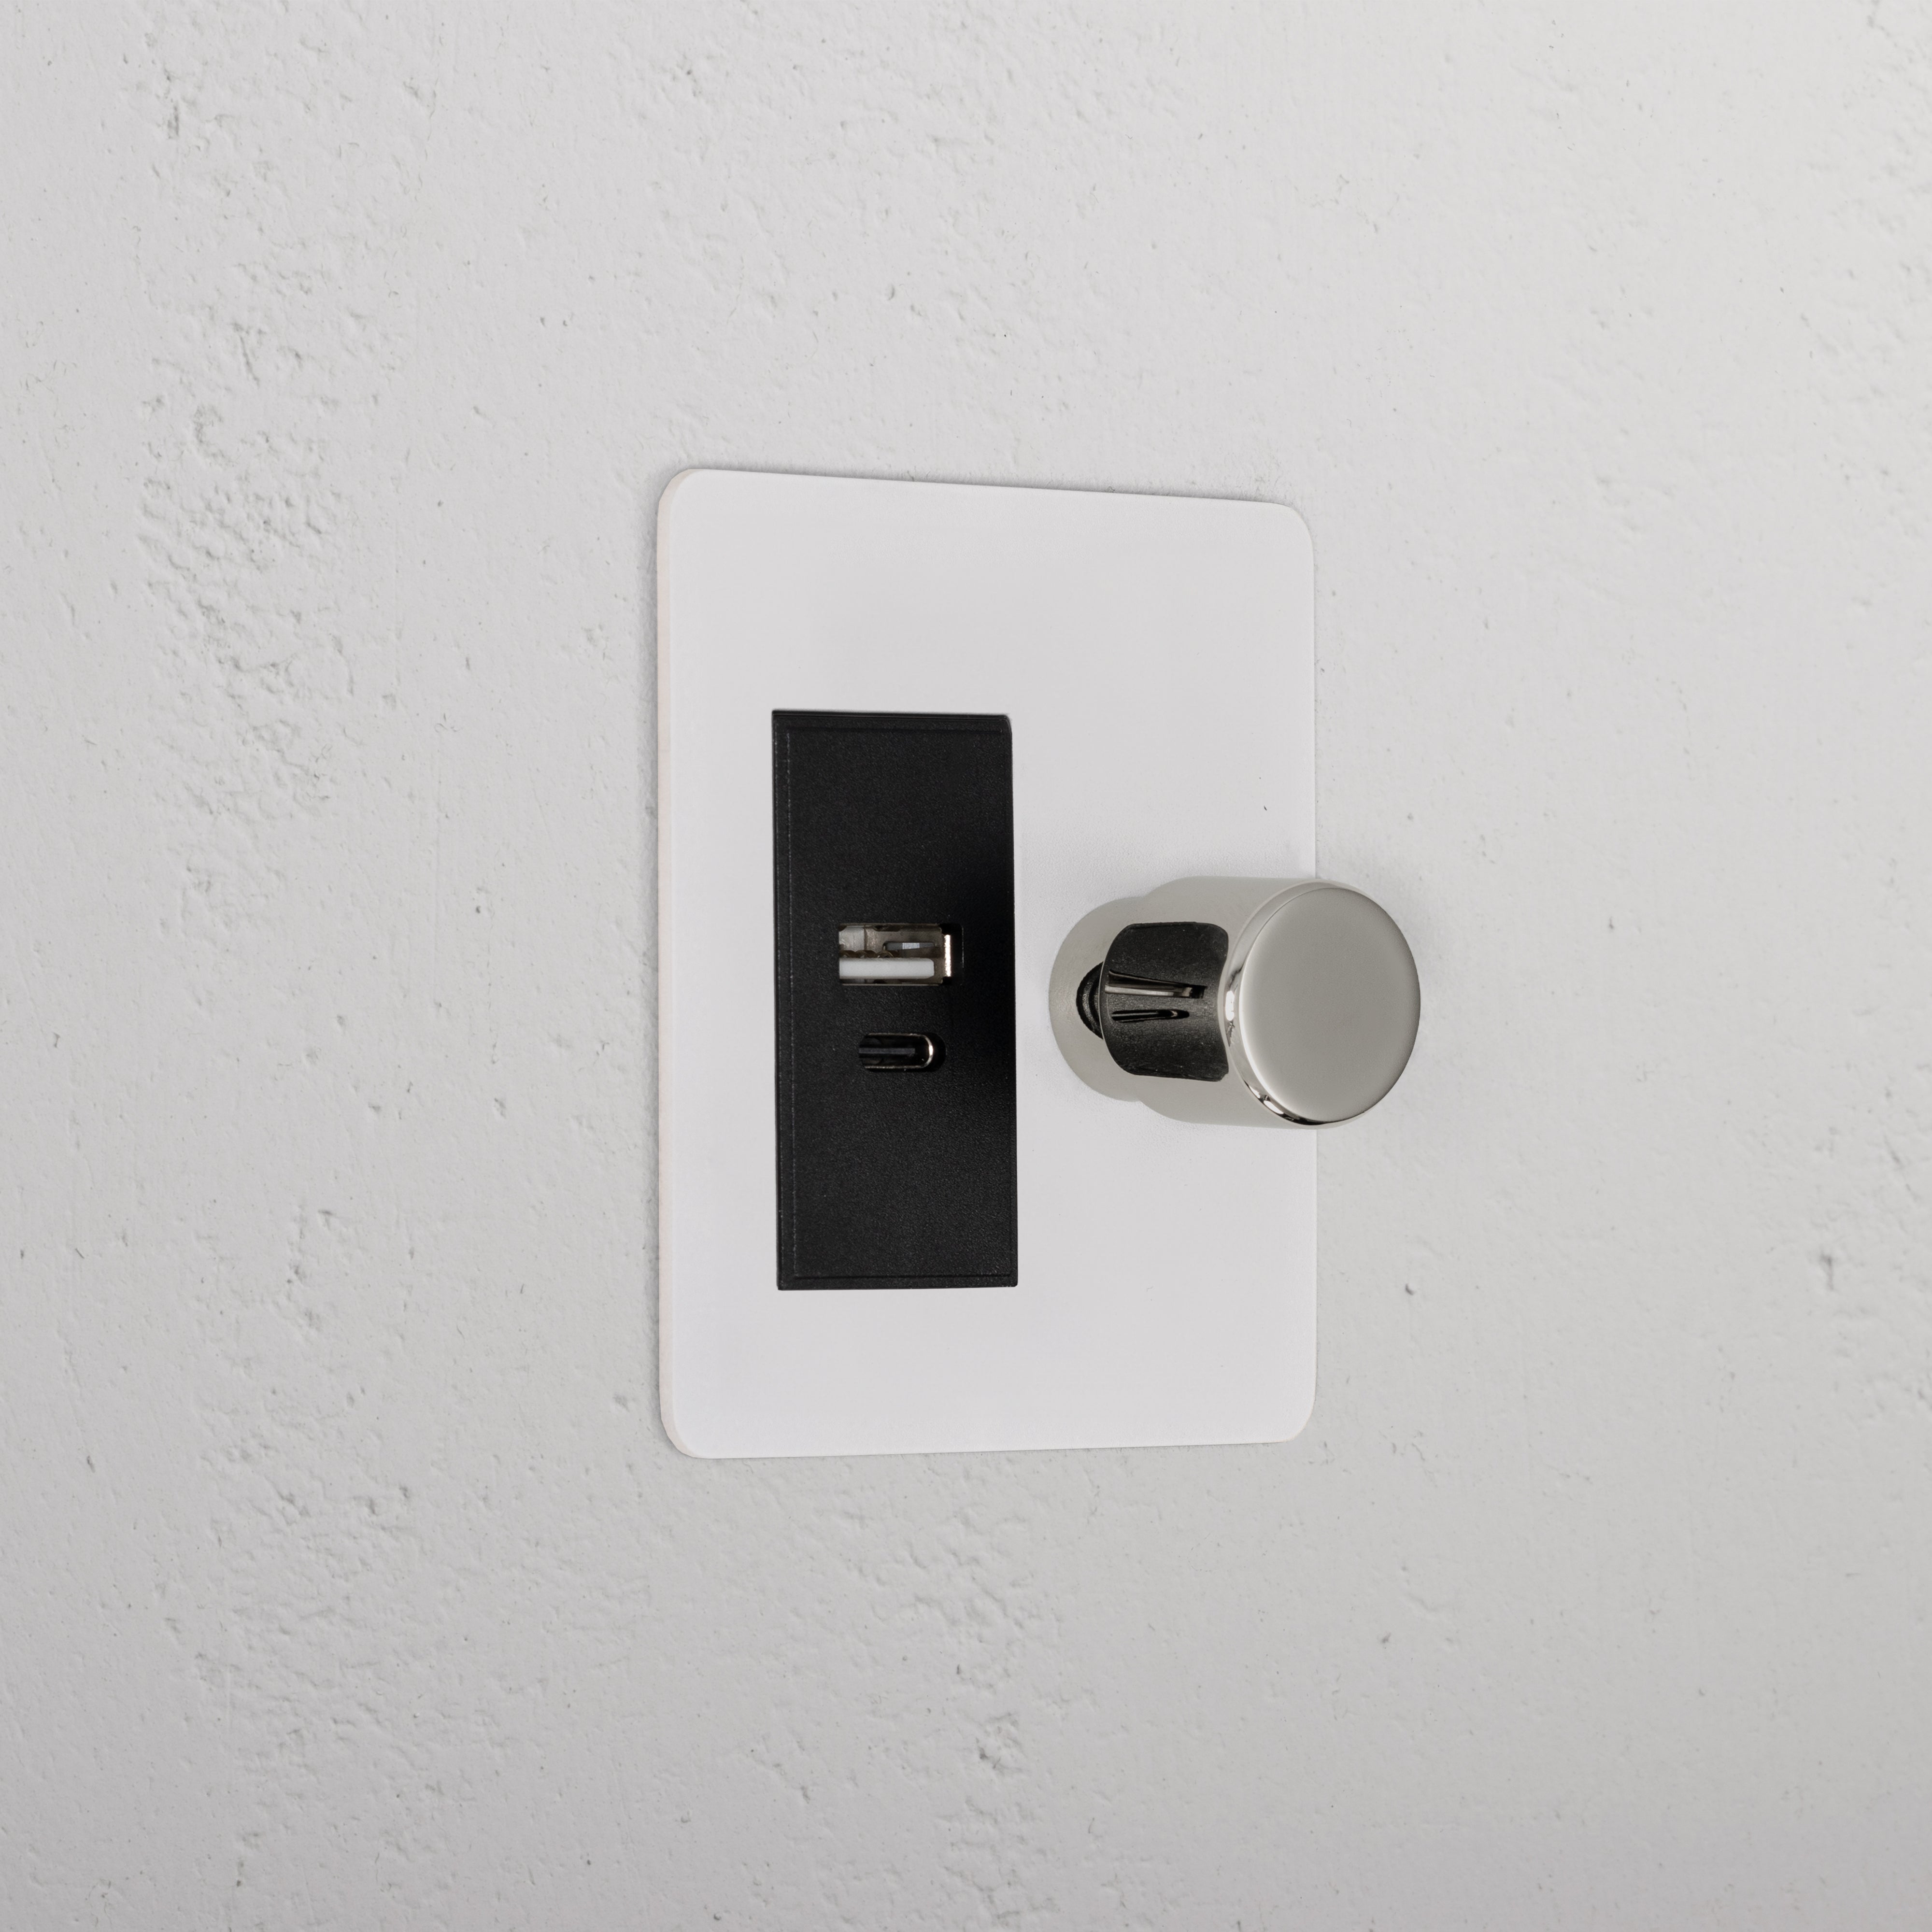 1G Two Way Dimmer + USB A+C Slimline Switch _ Paintable Polished Nickel Black